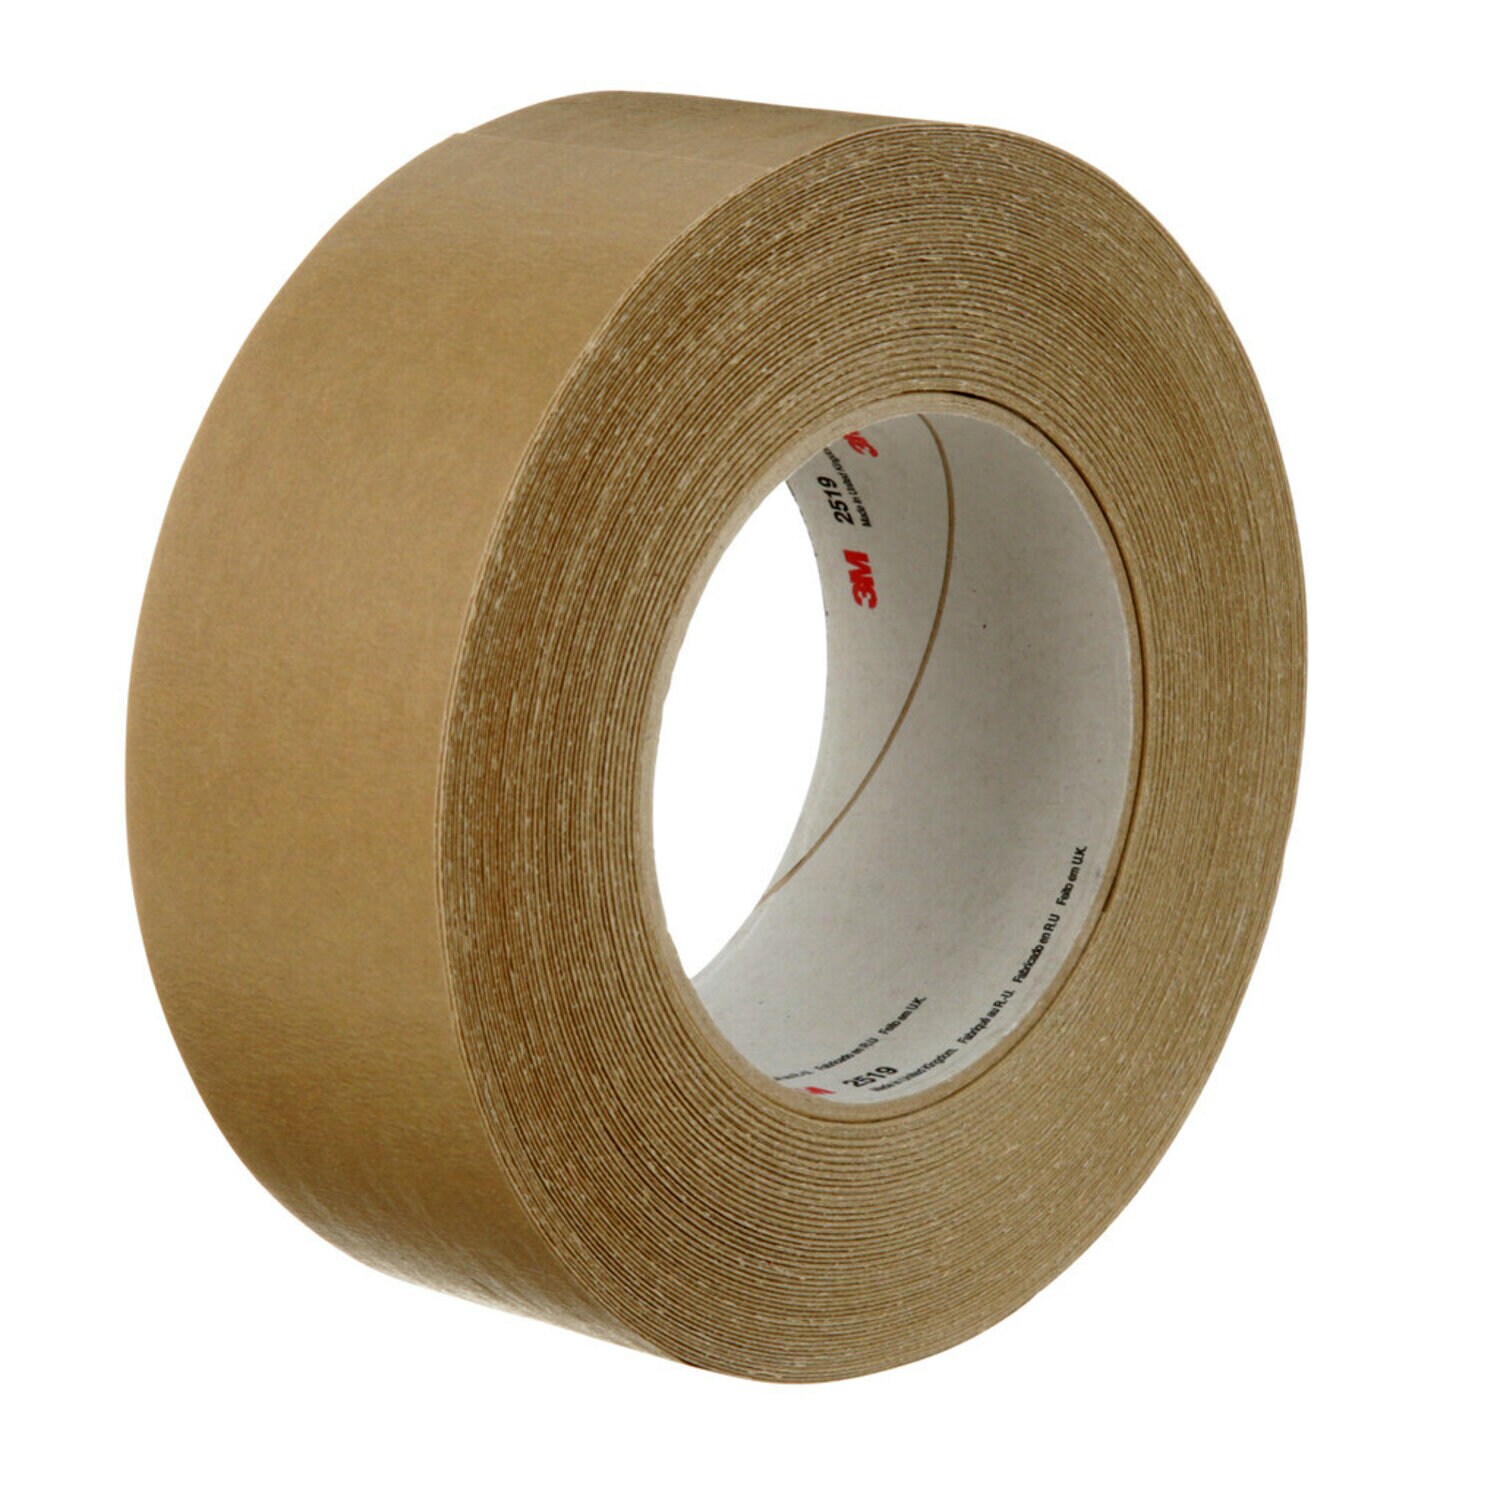 7100243535, 3M High Performance Flatback Tape 2519, Tan, 48 mm x 55 m, 24  Roll/Case, Aircraft products, paper-tapes